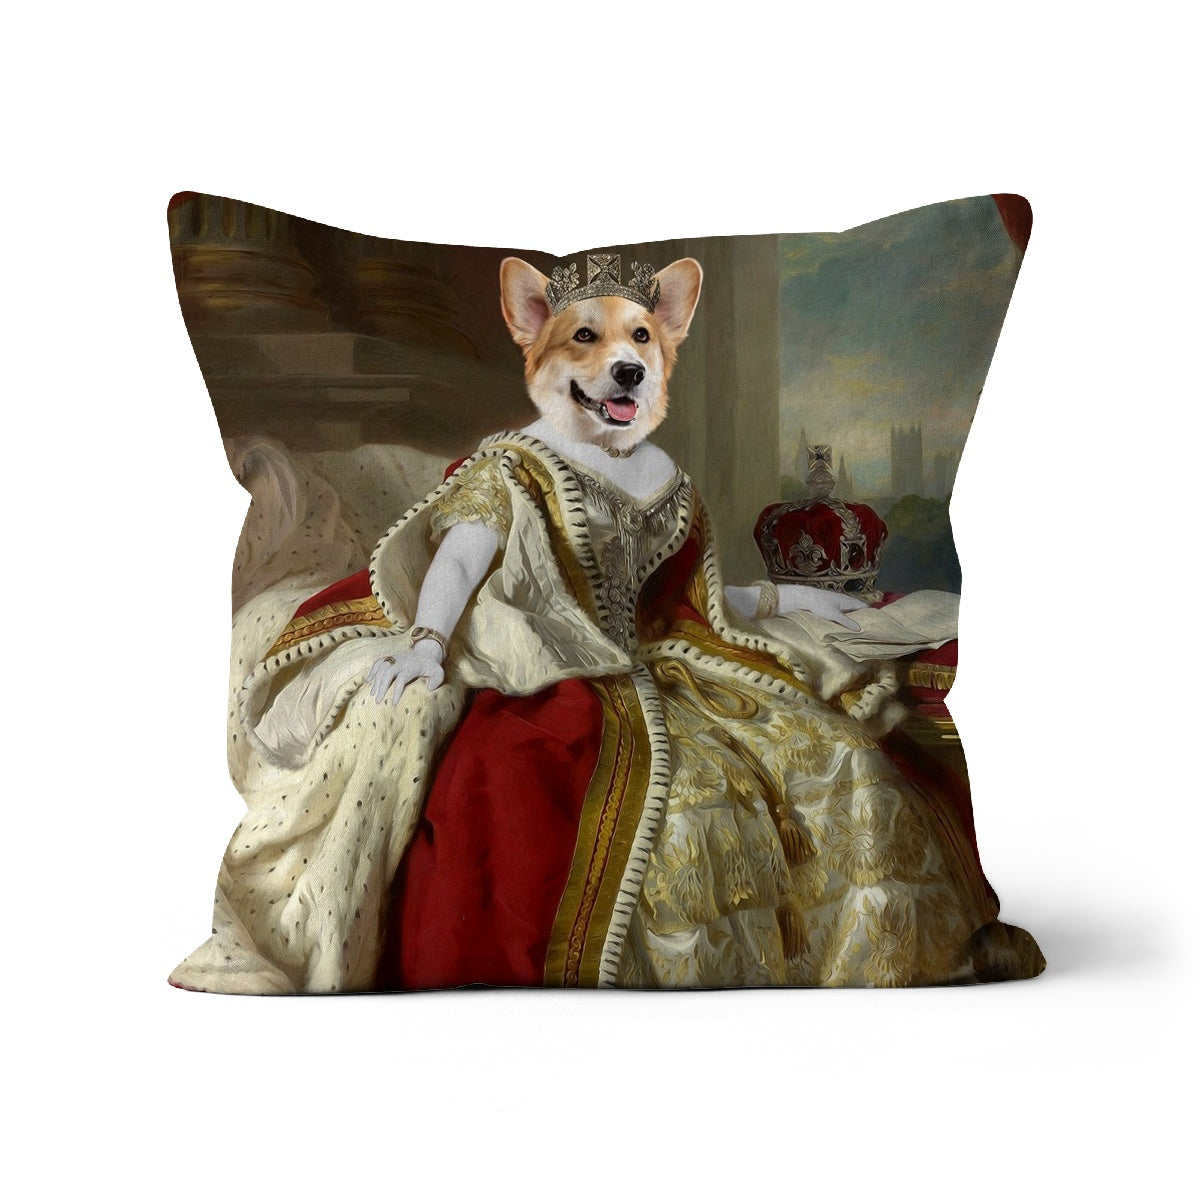 The Queen: Custom Pet Pillow: Paw & Glory,pawandglory,custom pillow of your pet, print pet on pillow, personalised cat pillow, dog shaped pillows, custom pillow of pet